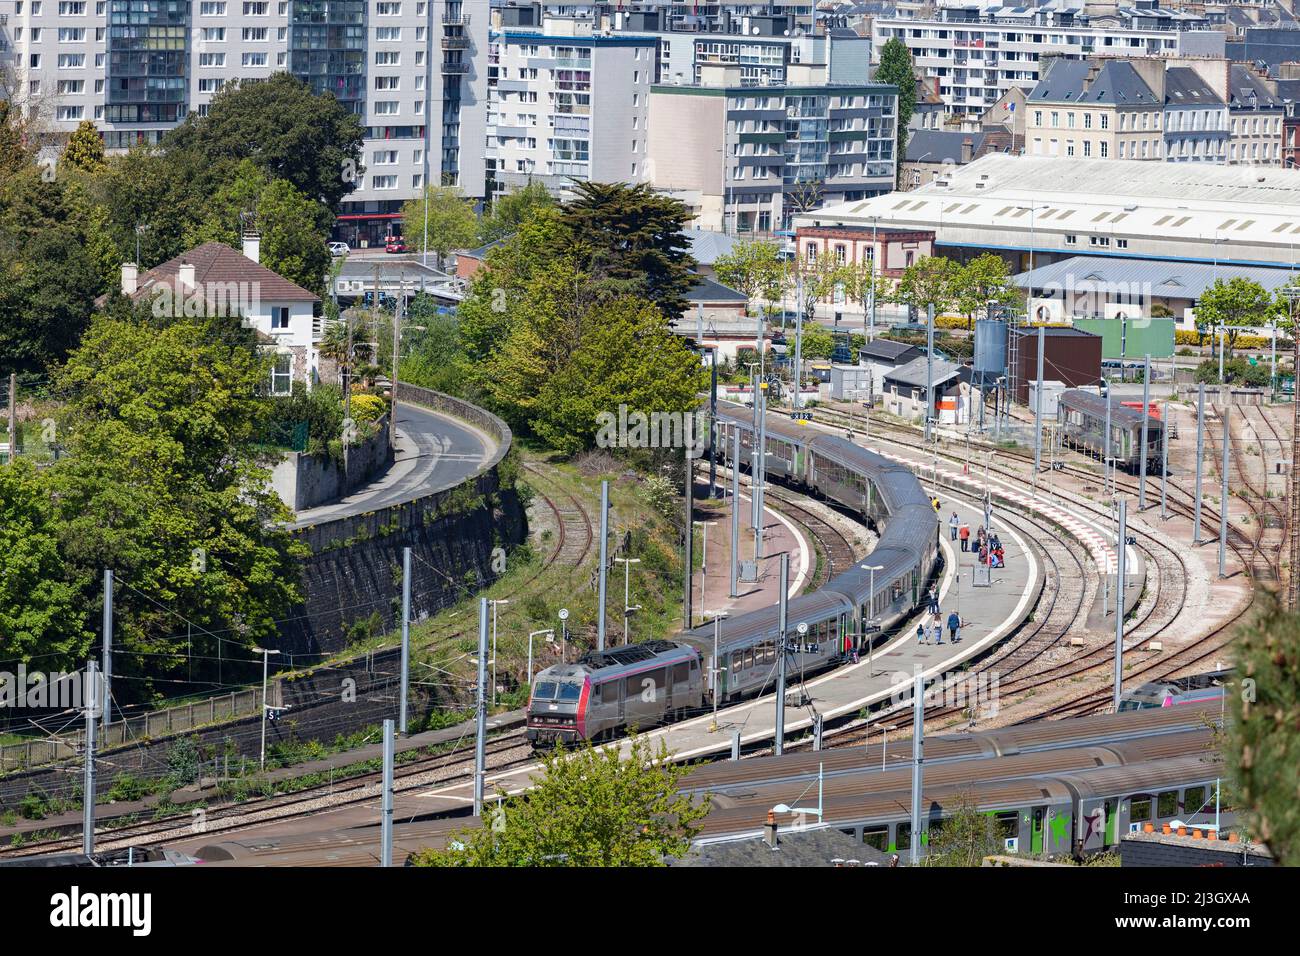 France, Manche, Cotentin, Cherbourg-Octeville, elevated view of the railway station and trains Stock Photo